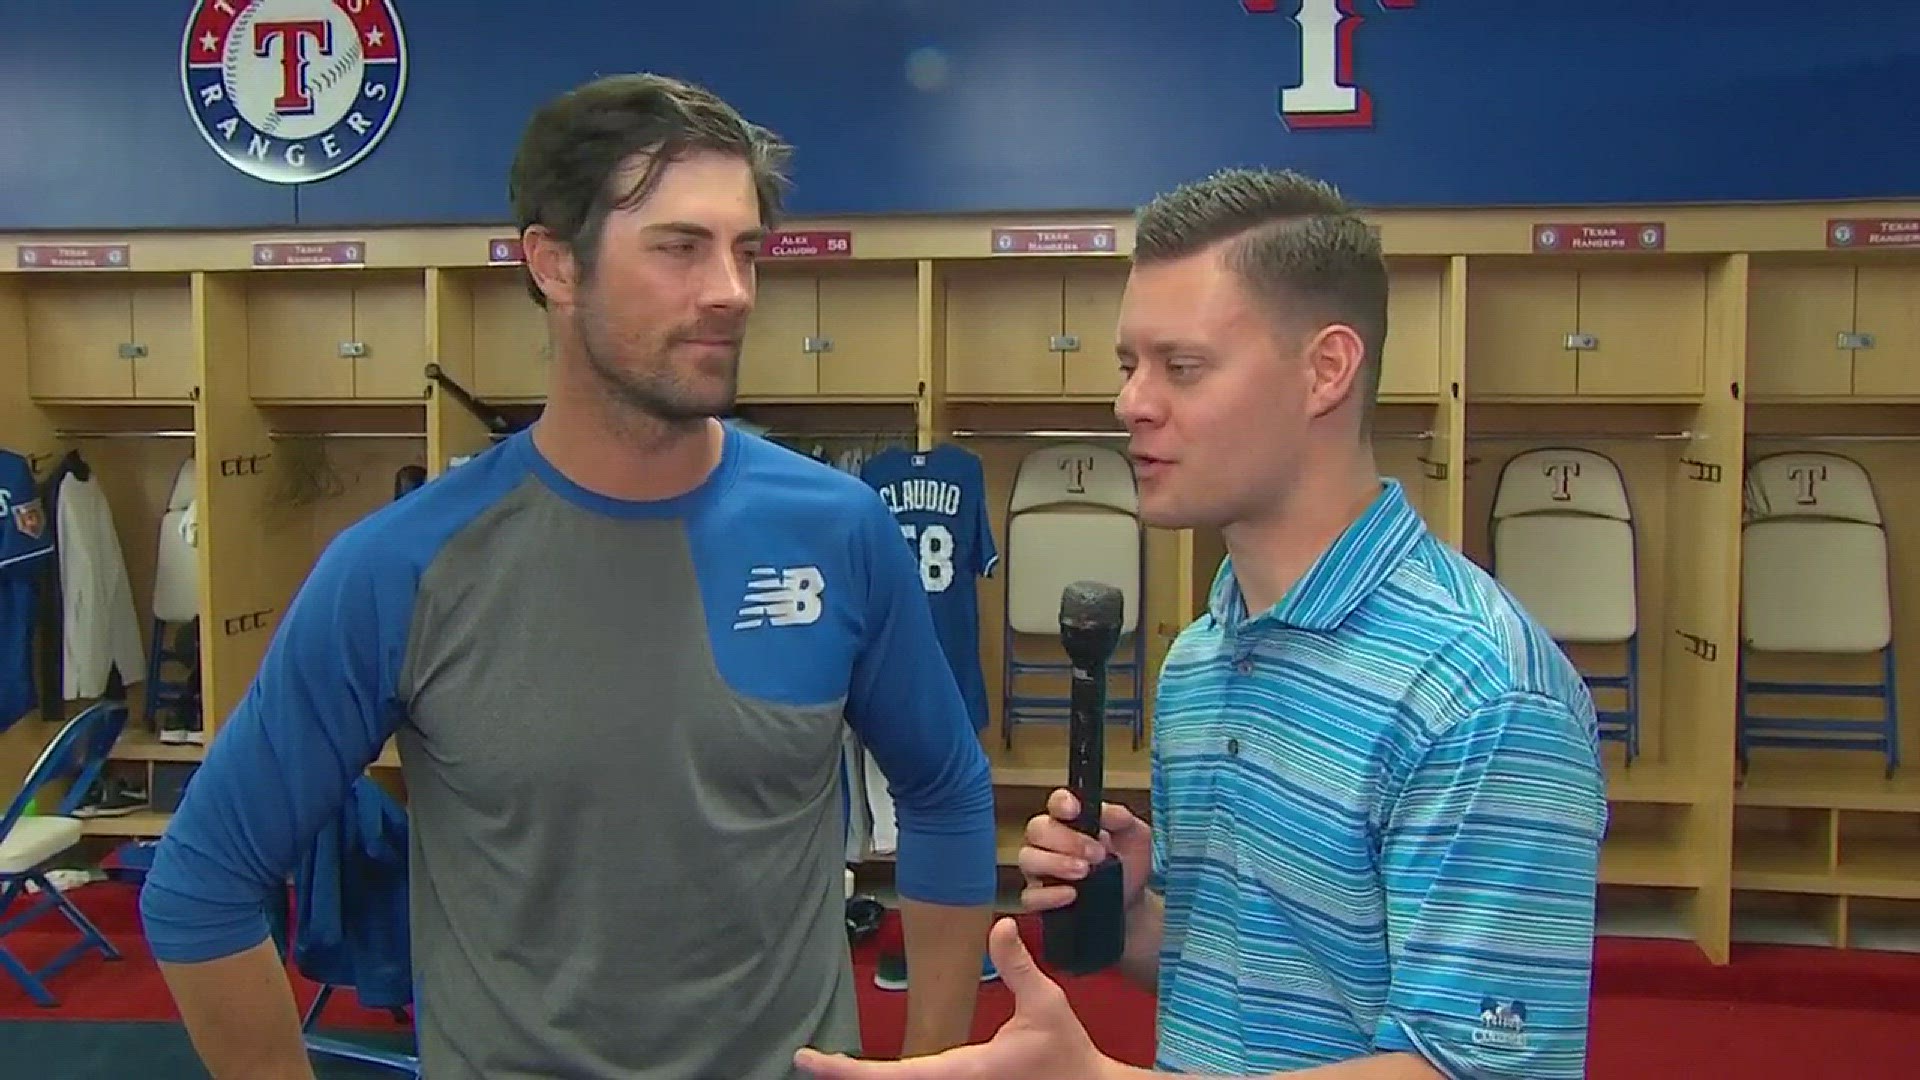 Rangers ace Cole Hamels goes 1-on-1 with our Mike Leslie, as he gets closer to making the Opening Day start at Globe Life Park